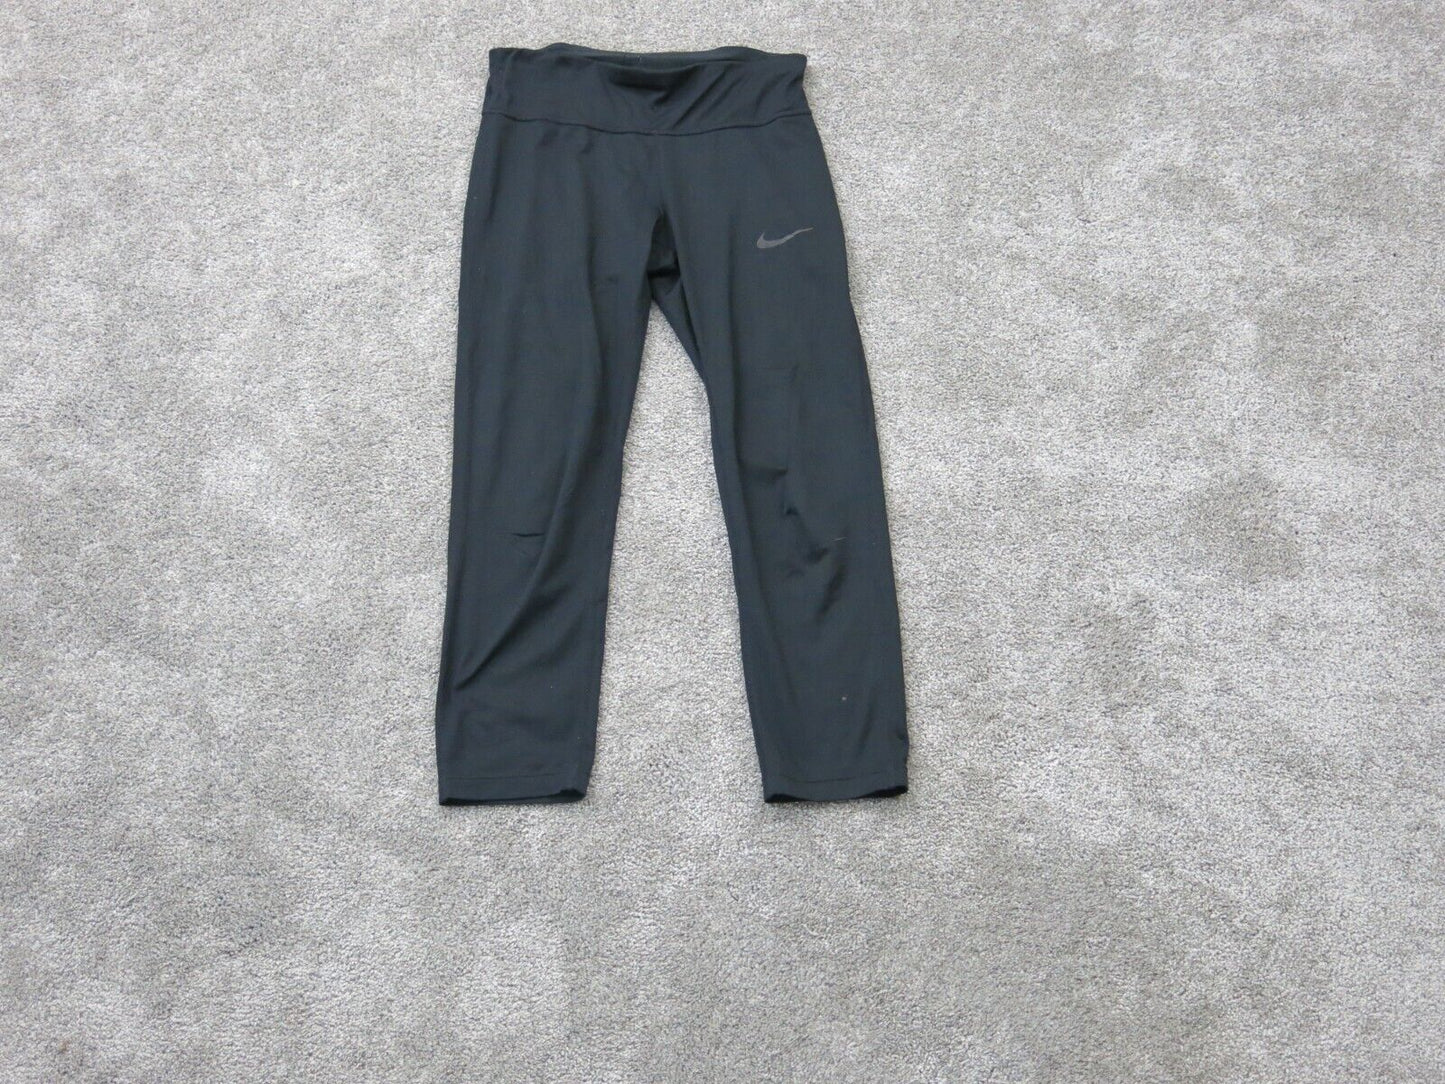 Nike Womens Dry Fit Stretch Legging Pants Running High Waist Black Size Small